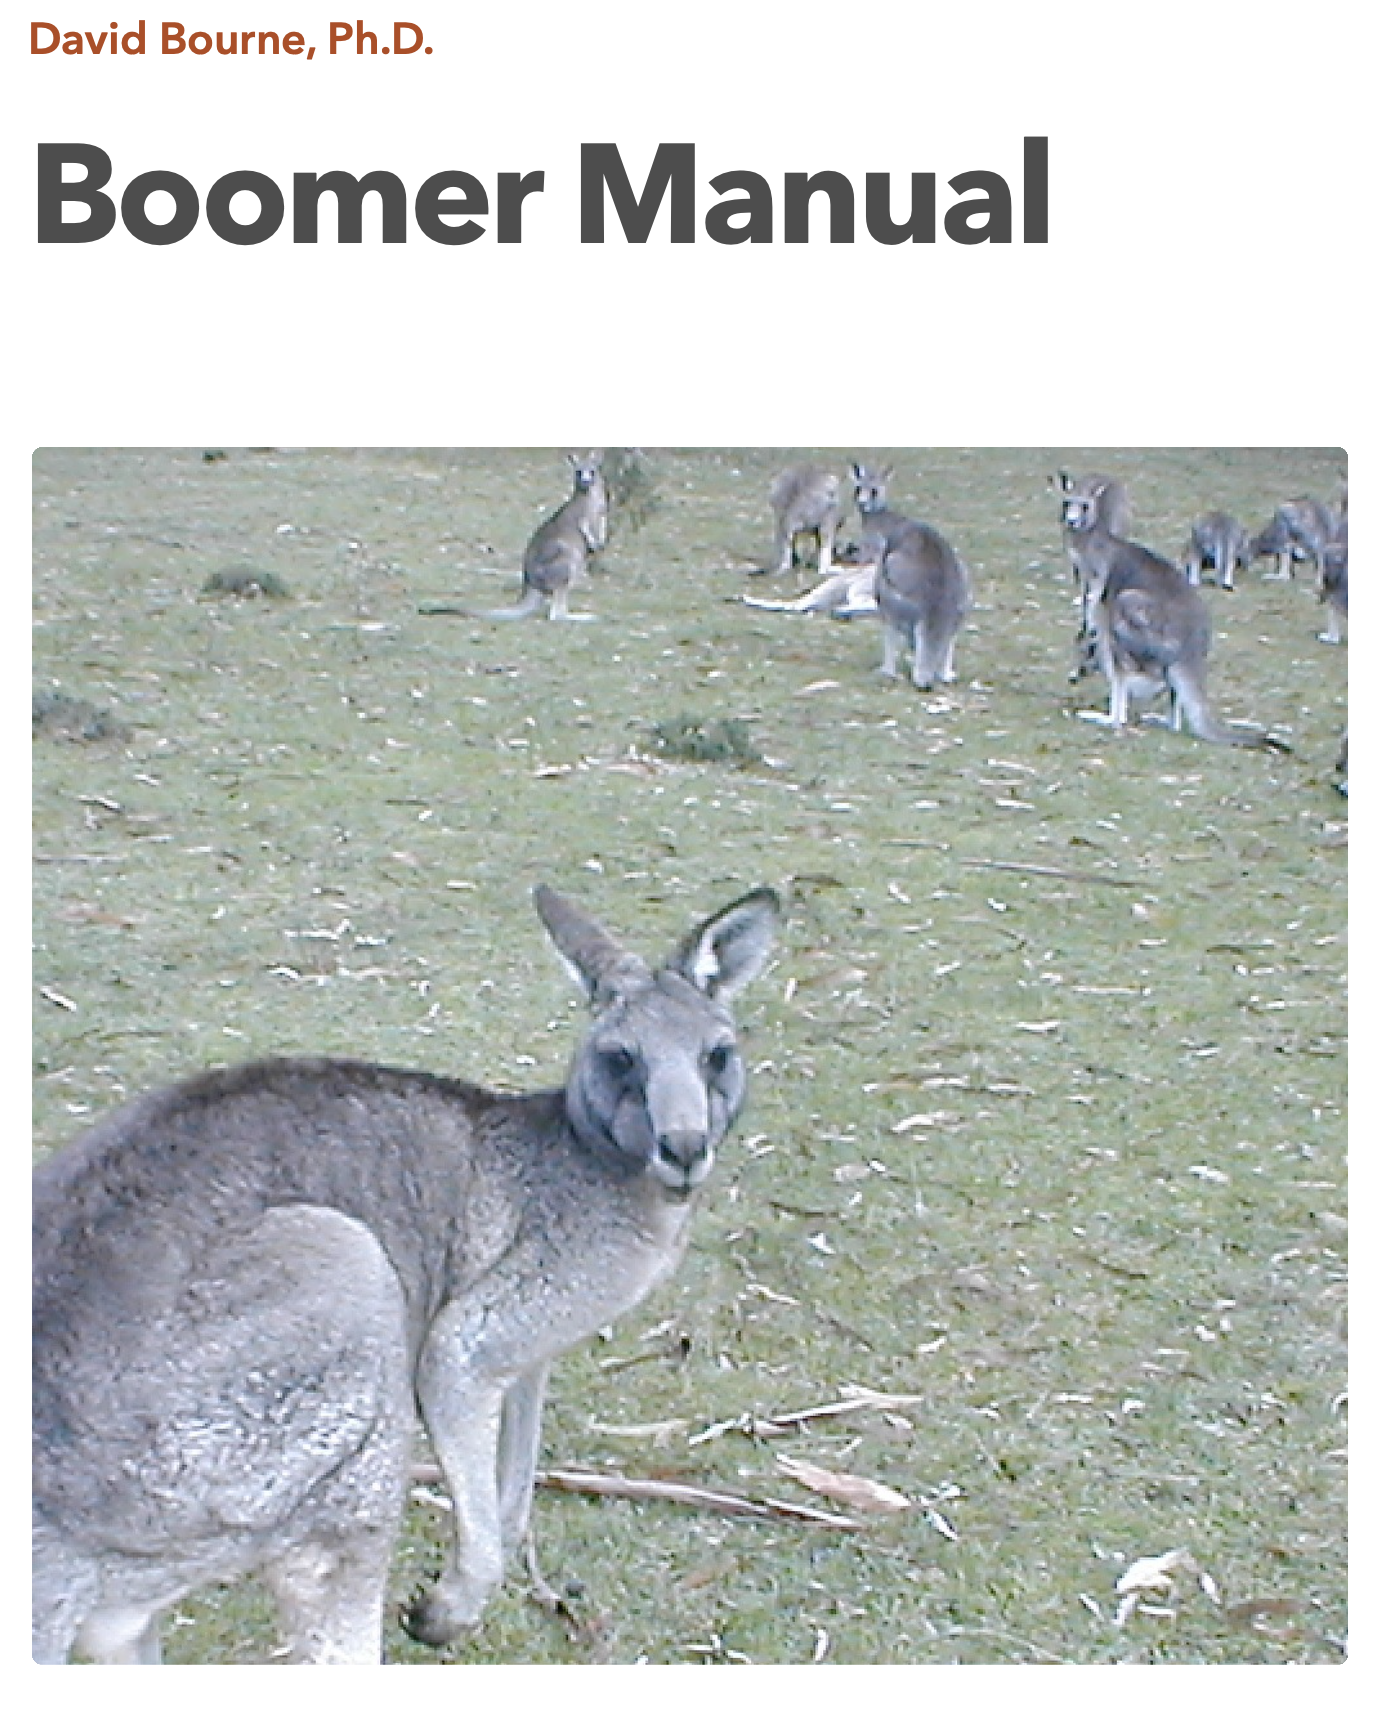 Boomer Manual cover page